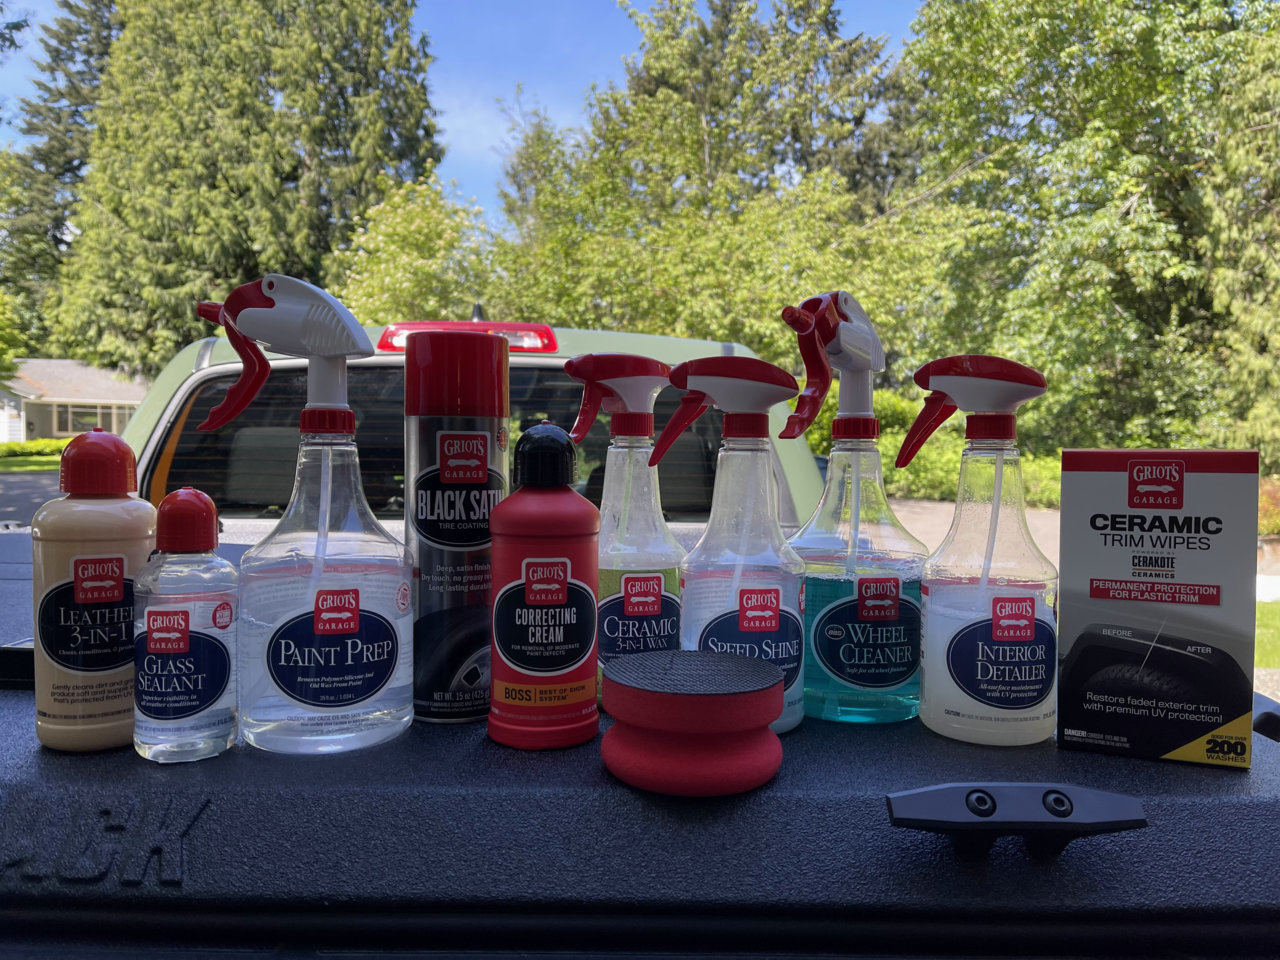 Griot's Garage Ceramic Speed Shine: A Quick Review of a Tiny Bottle 